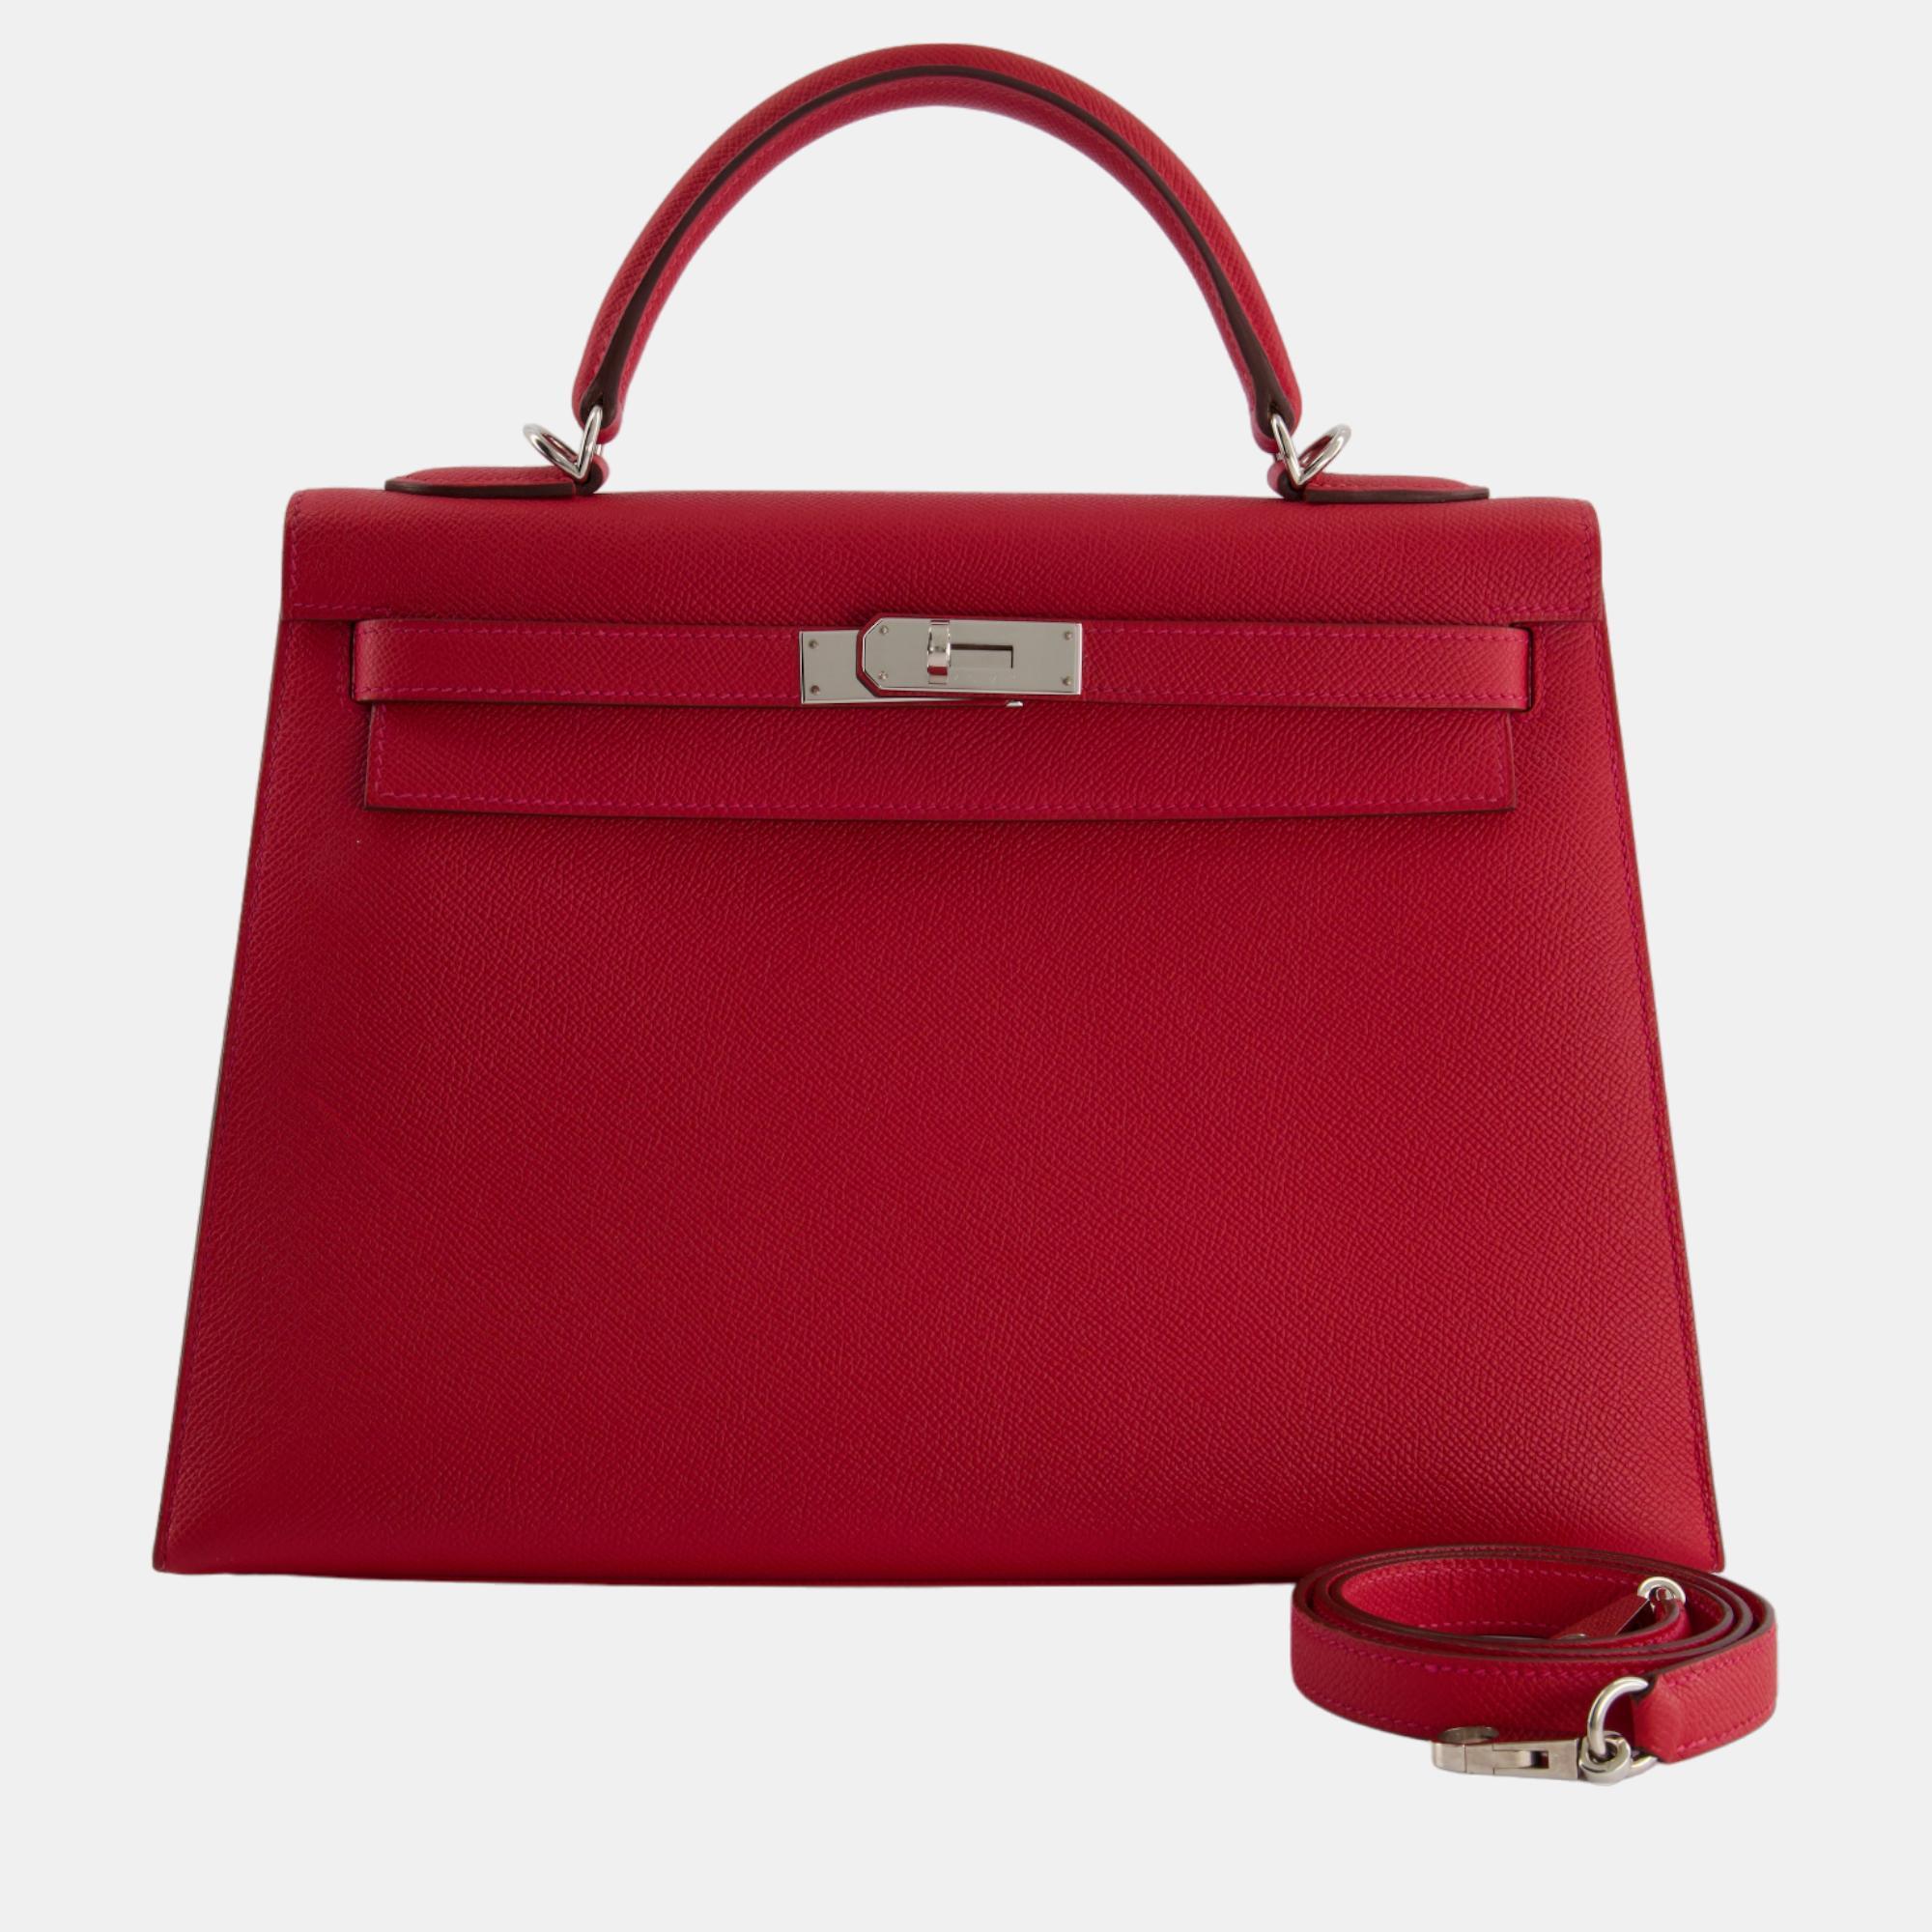 Hermes Kelly Bag 32cm In Rouge Piment Epsom Leather With Palladium Hardware